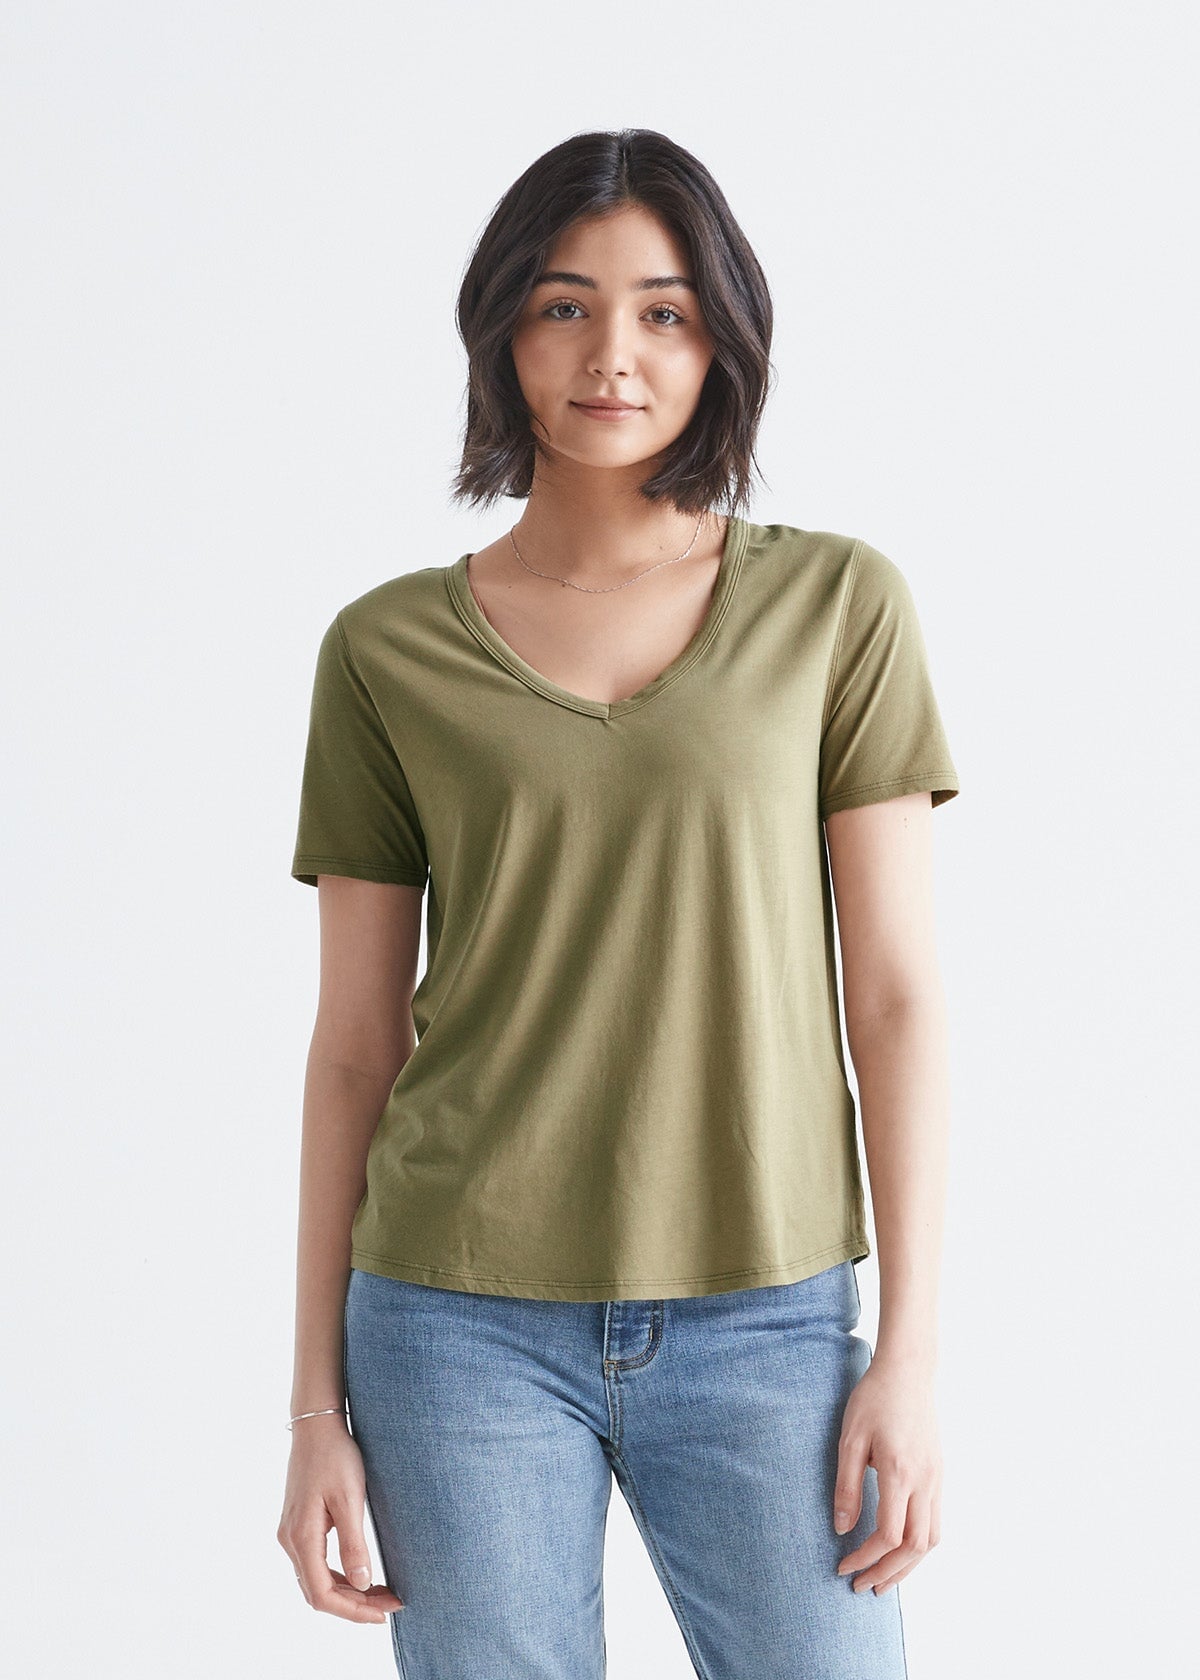 womens soft light-weight olive v-neck t-shirt front